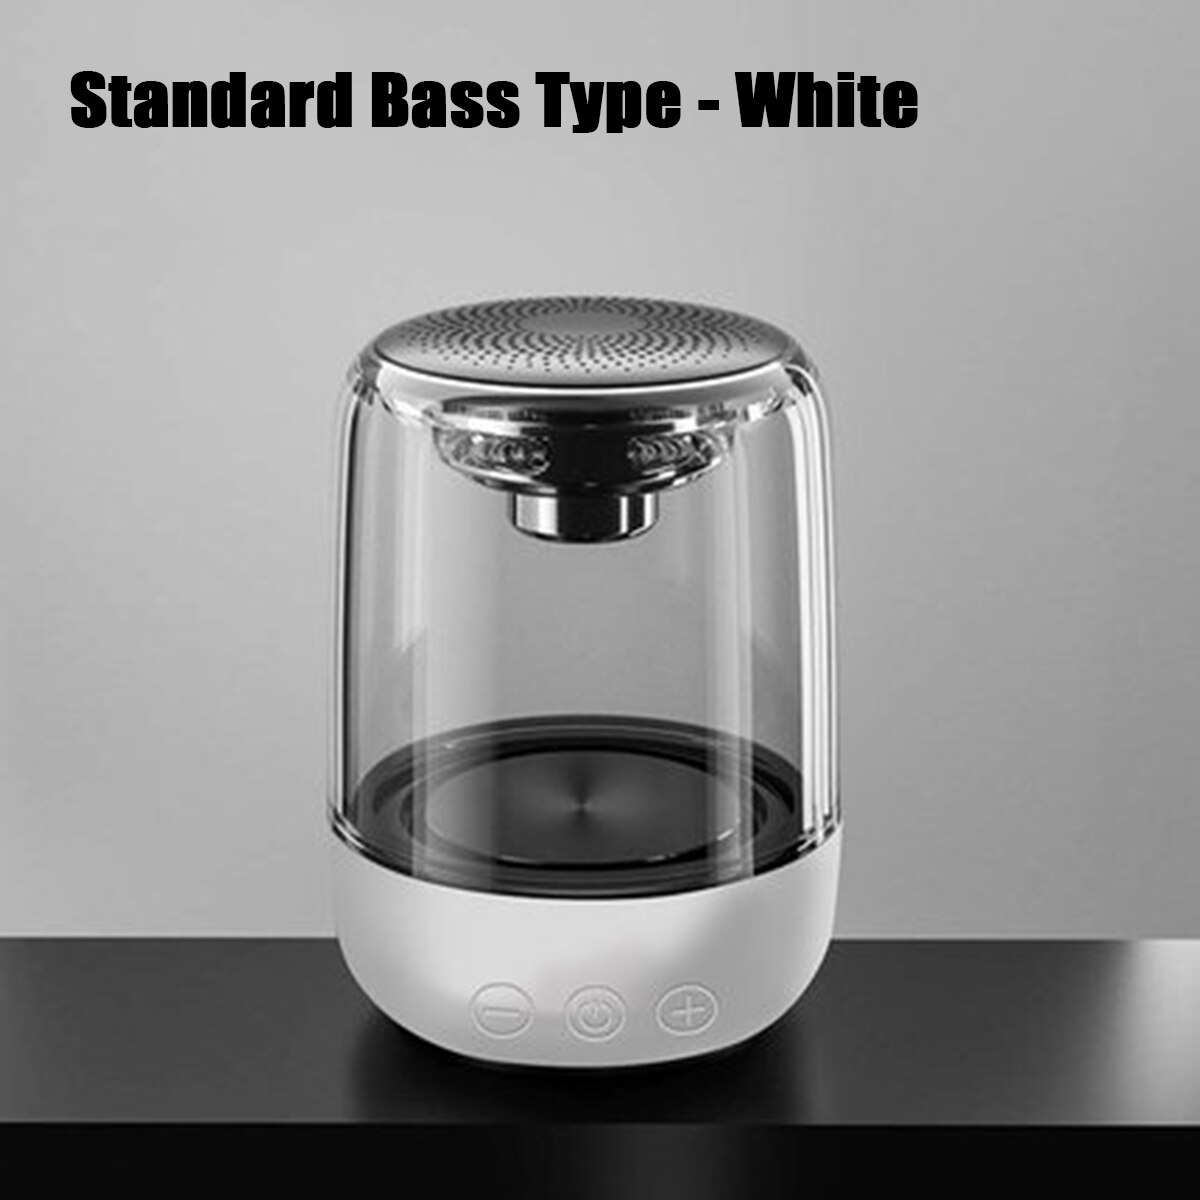 Bluetooth Wireless Speakers Waterproof Stereo Column Portable Bass Subwoofer Speaker Colorful Light Support TF Card with Mic: White A